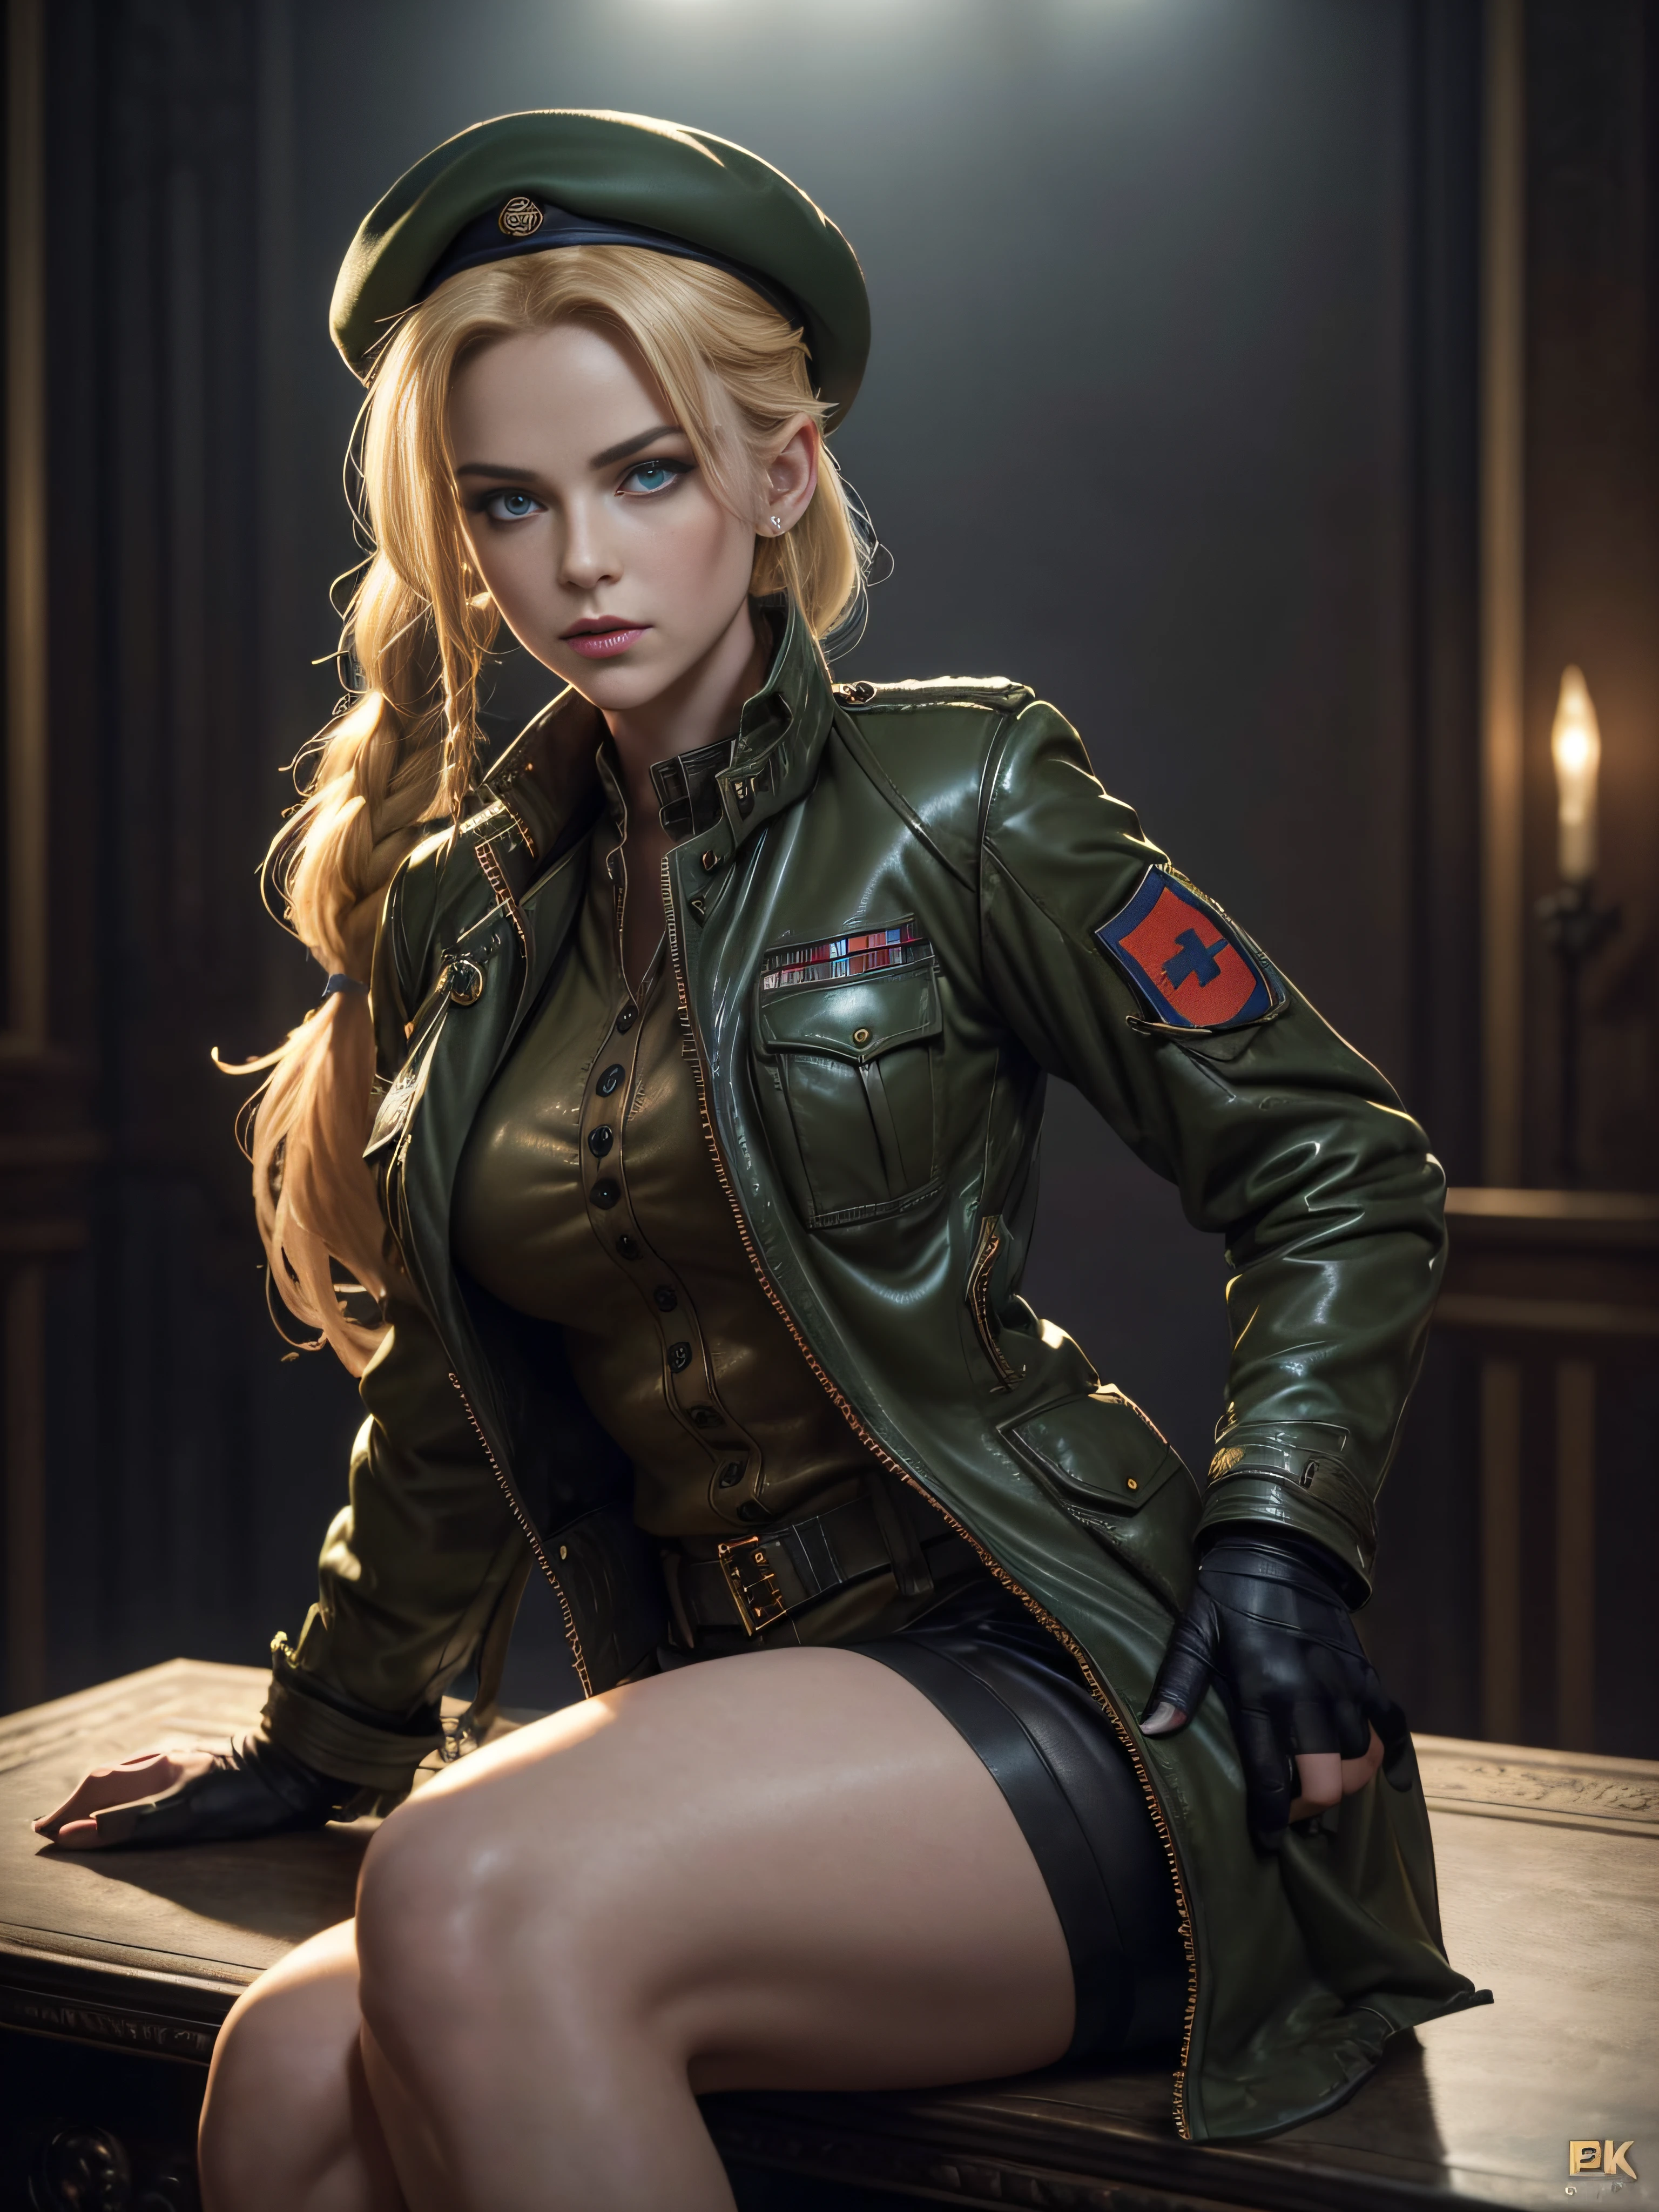 "(exquisitely detailed CG unity 8k wallpaper, masterpiece-quality with stunning realism), (best illumination, best shadow), (best quality), (elegant and demonic style:1.2), Arti modern anime. angled view, heroic pose, closeup full body portrait of stunningly beautiful cammy from street fighter, Masterpiece, best quality, highres, mature Cammy white, twin braids, long hair, blonde hair, antenna hair, beret, (red headwear:1), blue eyes, scar on cheek, green military leotard, green military shorts, red gloves, fingerless gloves, camouflage, (fully clothed:1), abs, depth of field blur effect, night, full zoom, action portrait, photorealistic. cinematic lighting, highly detailed. best quality, 4k, Better hand, perfect anatomy, leaning forward, foreshortening effects, coy flirty sexy expression, foreshortening effect, (piercing eyes:0.8), surrounded by an ominous and dark atmosphere, accentuated by dramatic and striking lighting, imbued with a sense of surreal fantasy". wearing laced military boots:1.5), (resting at a desk in MI6 headquarters:1) (wearing a British Military jacket:1.5) (mature:0.5)